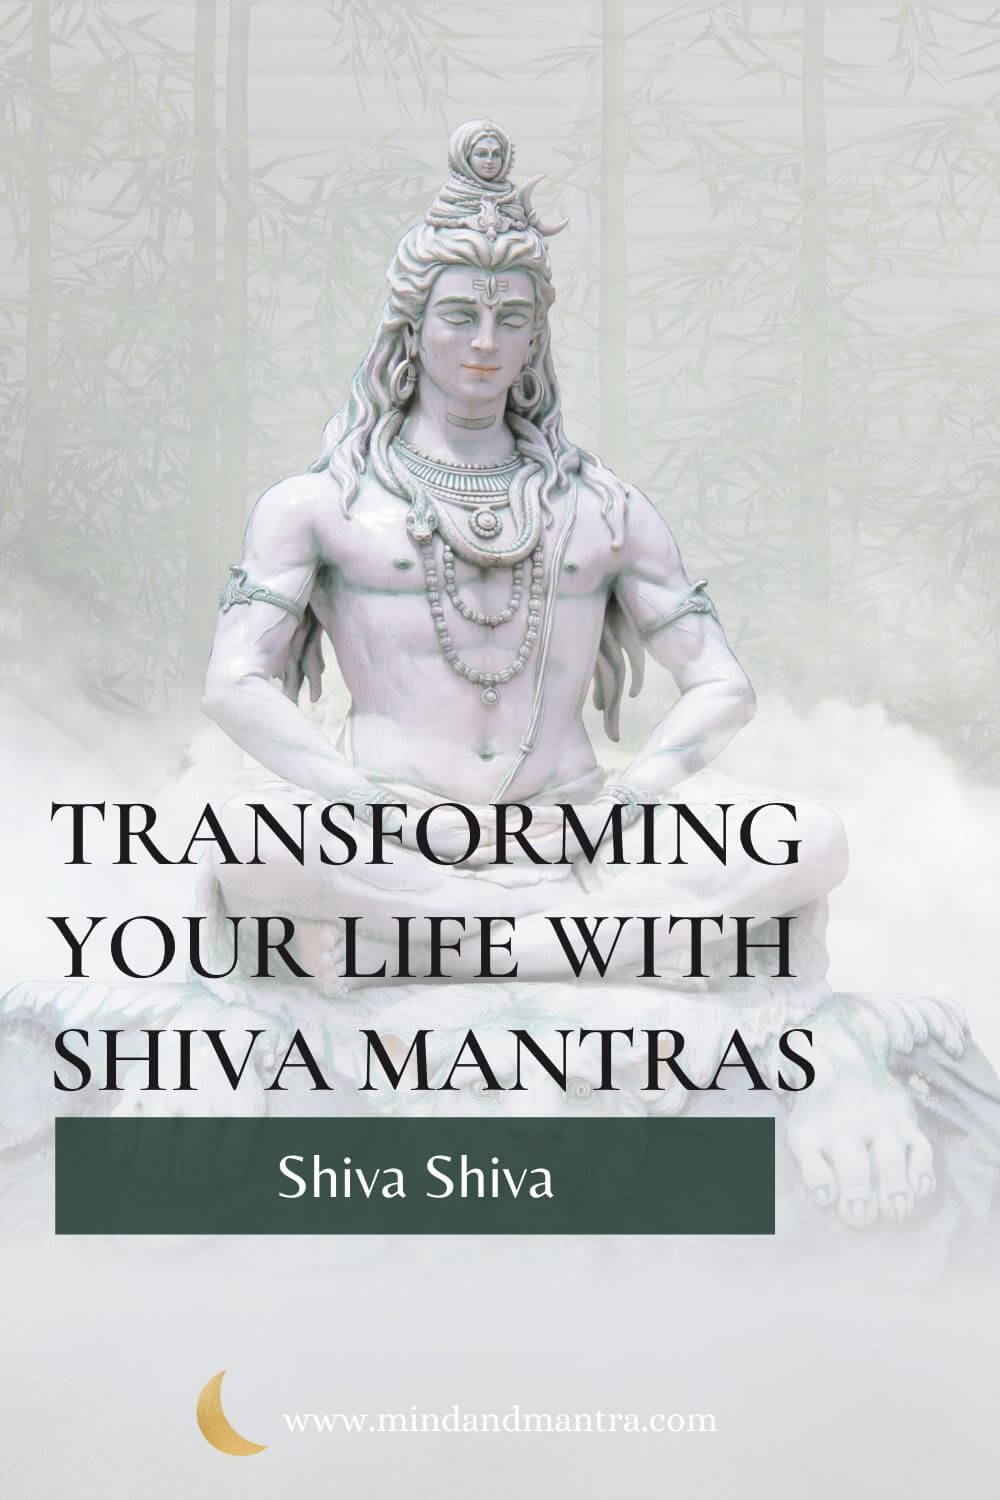 Who is Lord Shiva and what is a Shiva Linga 3 Life-Changing Shiva Mantras (3).jpg